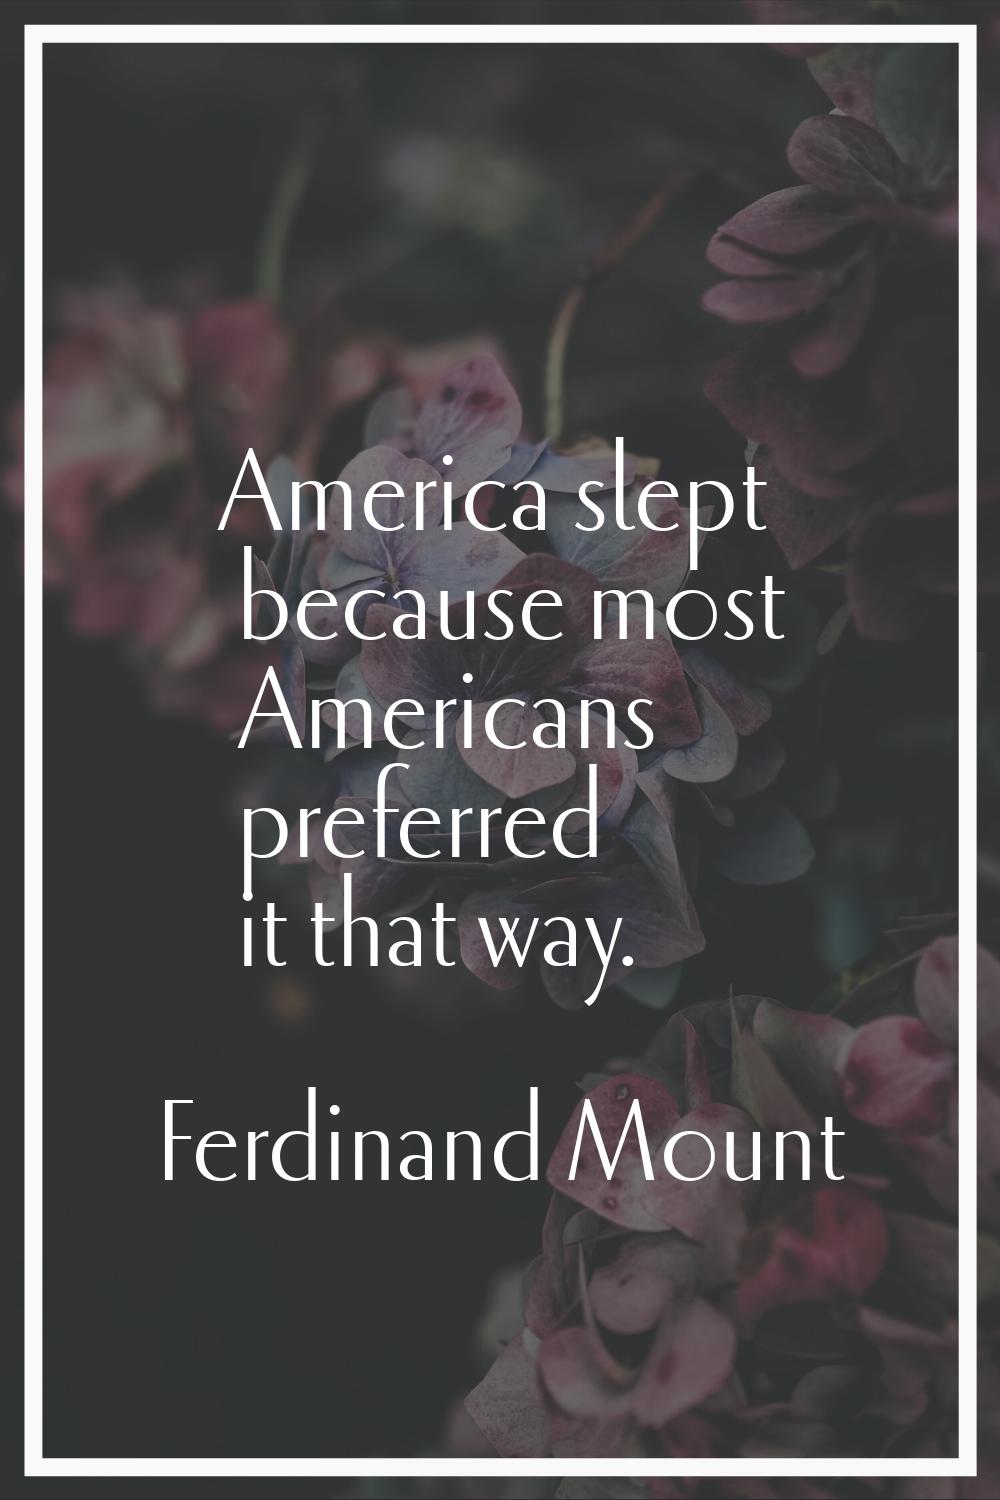 America slept because most Americans preferred it that way.